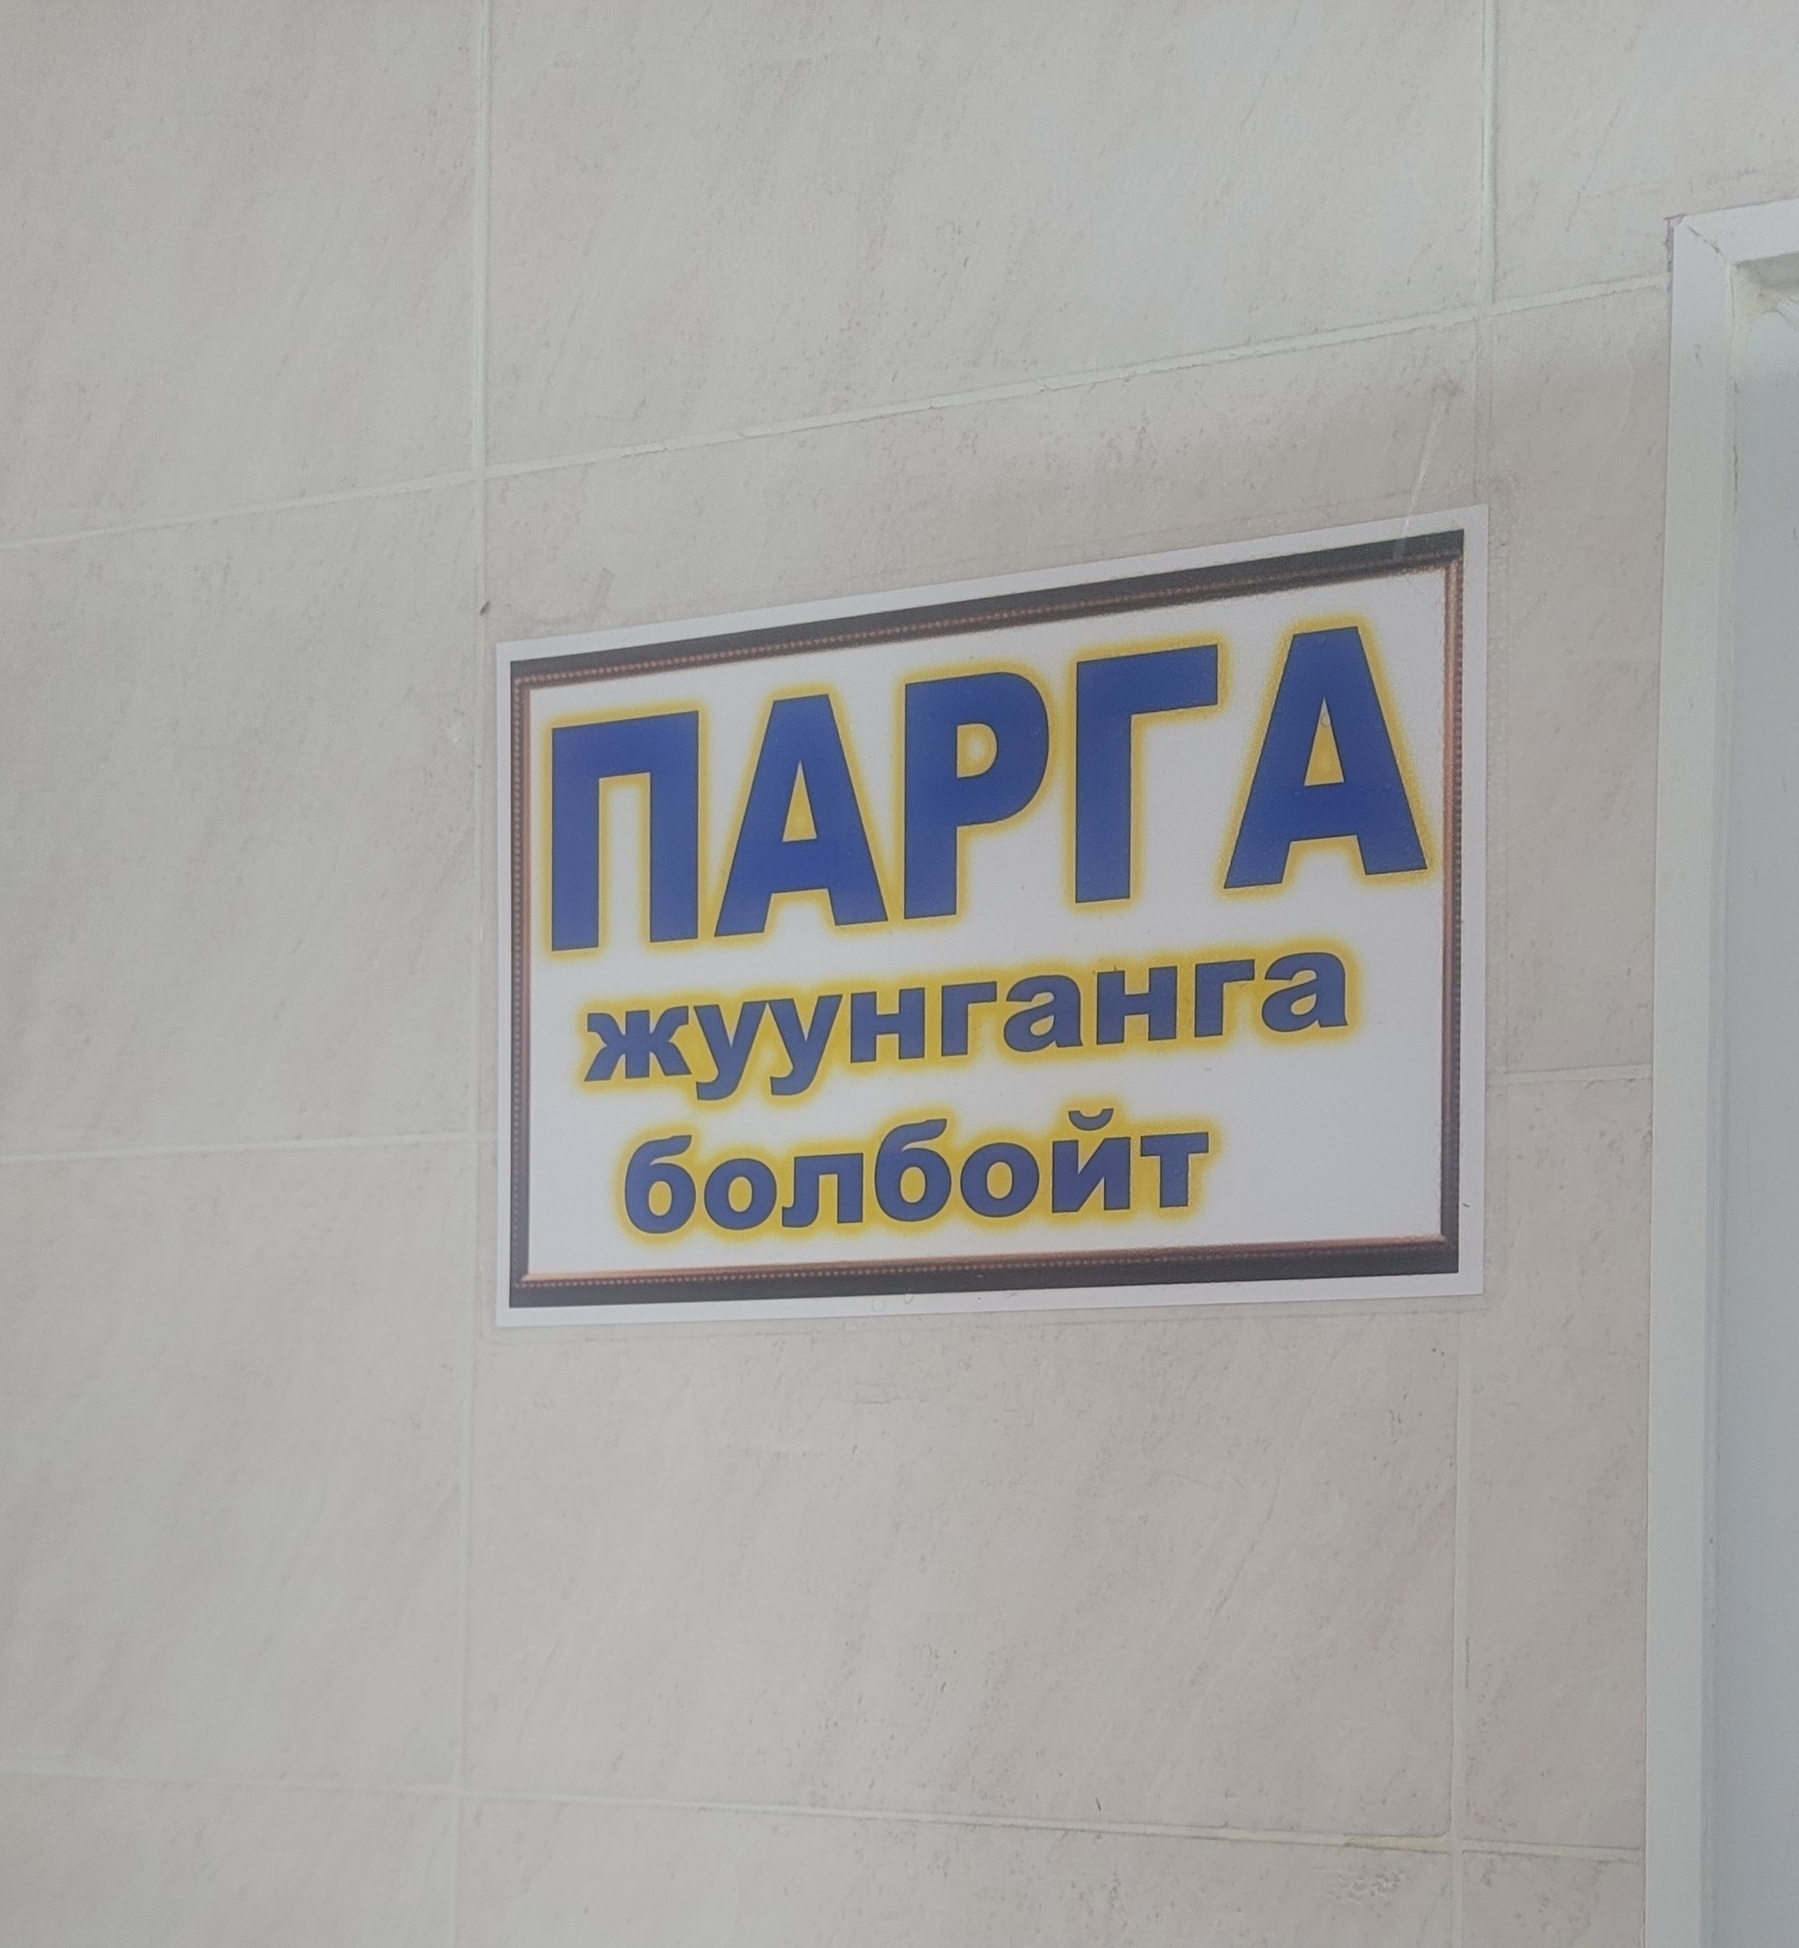 sign on a wall which seems to be mostly in Kyrgyz with the following text: парга жуунганга болбойт